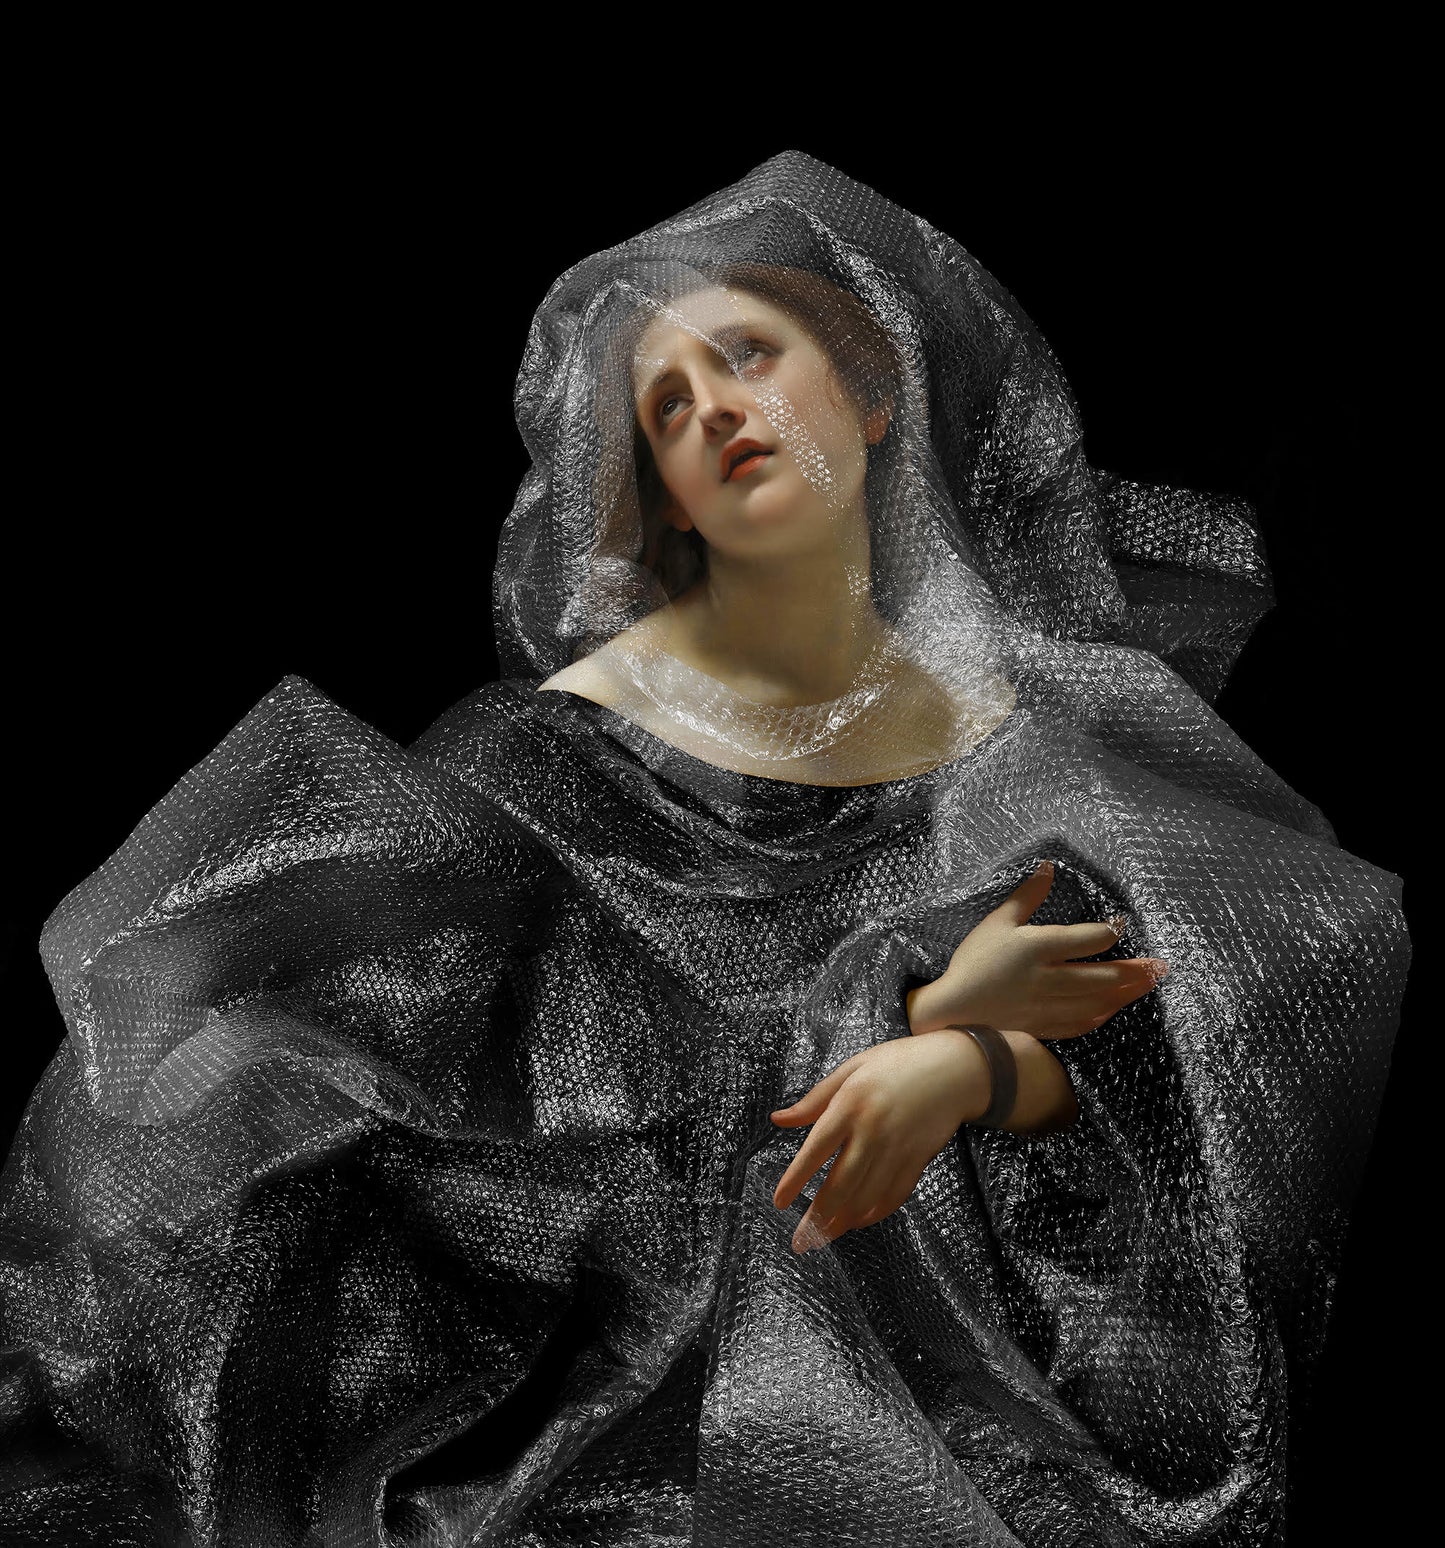 Art print by Magnus Gjoen titled 'Thou Shalt Go Gently into the Dark.' A playful and thought-provoking blend of Renaissance aesthetics and contemporary material, featuring a woman in a bubble wrap dress. Limited edition of 25, sized at 70 x 75 cm, priced at £995.00, inviting viewers to reflect on the paradox of vulnerability and resilience in art.